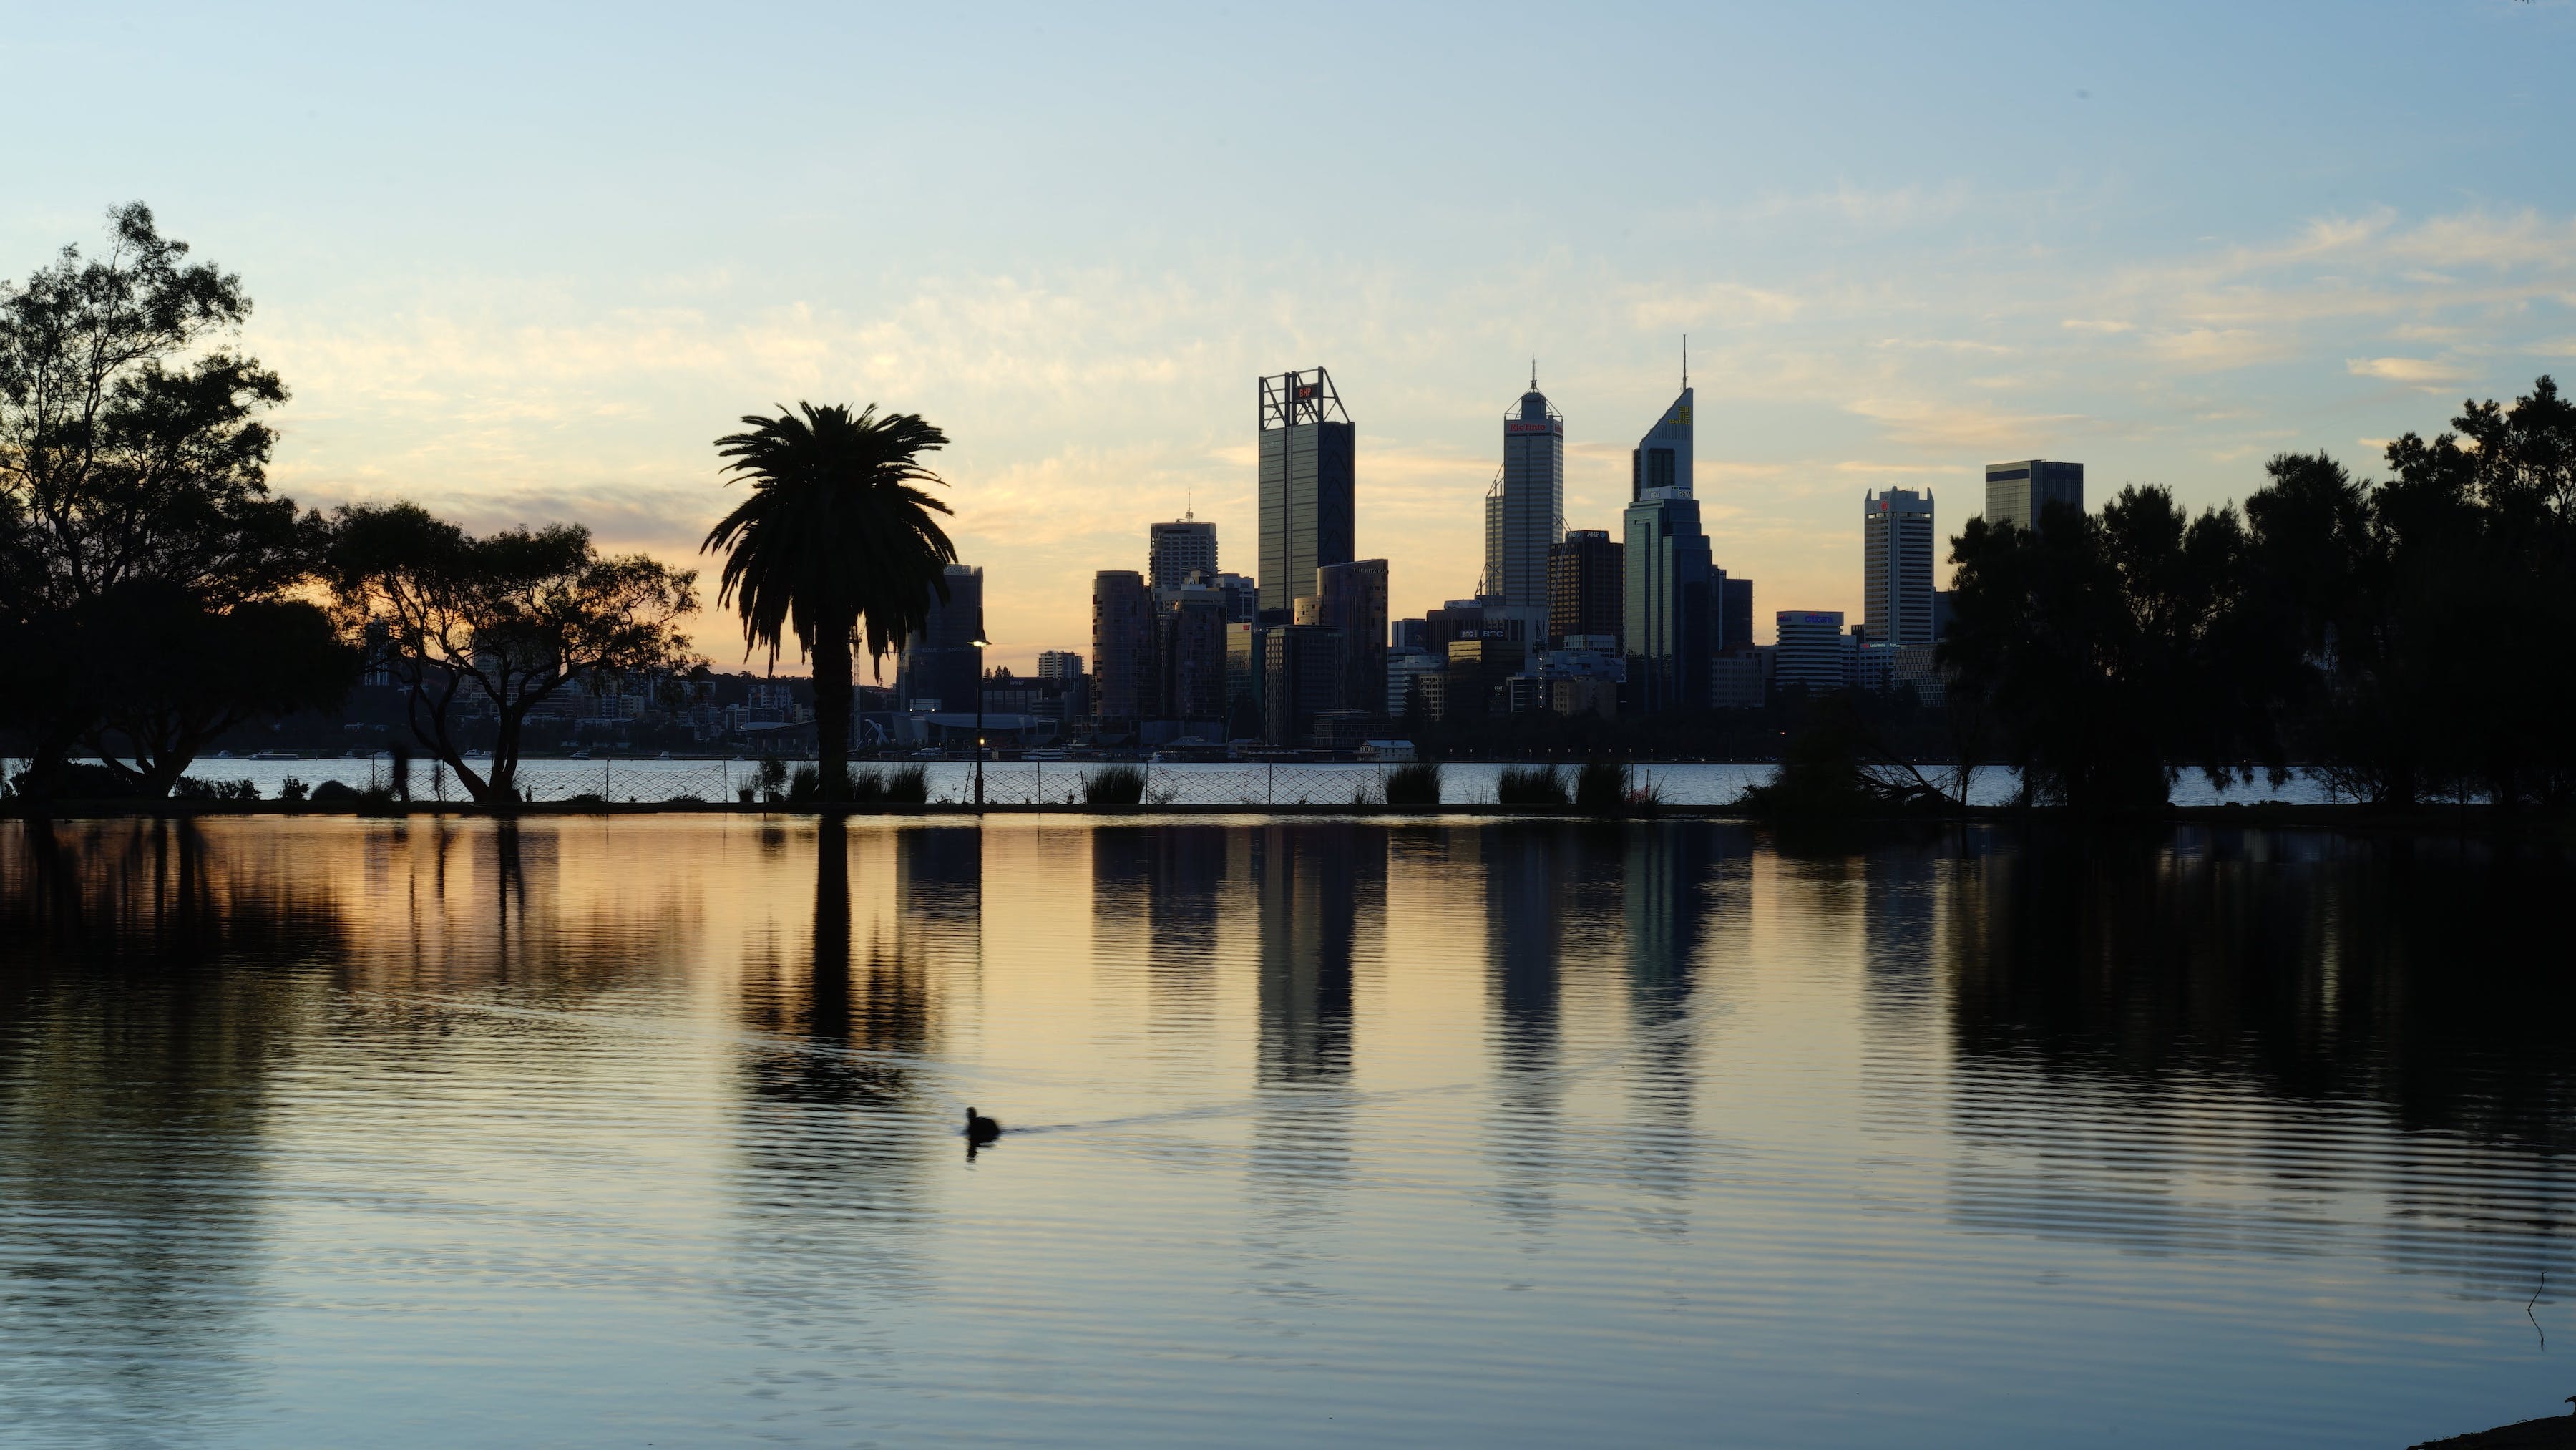 City skyline reflected on water with palm trees in the background